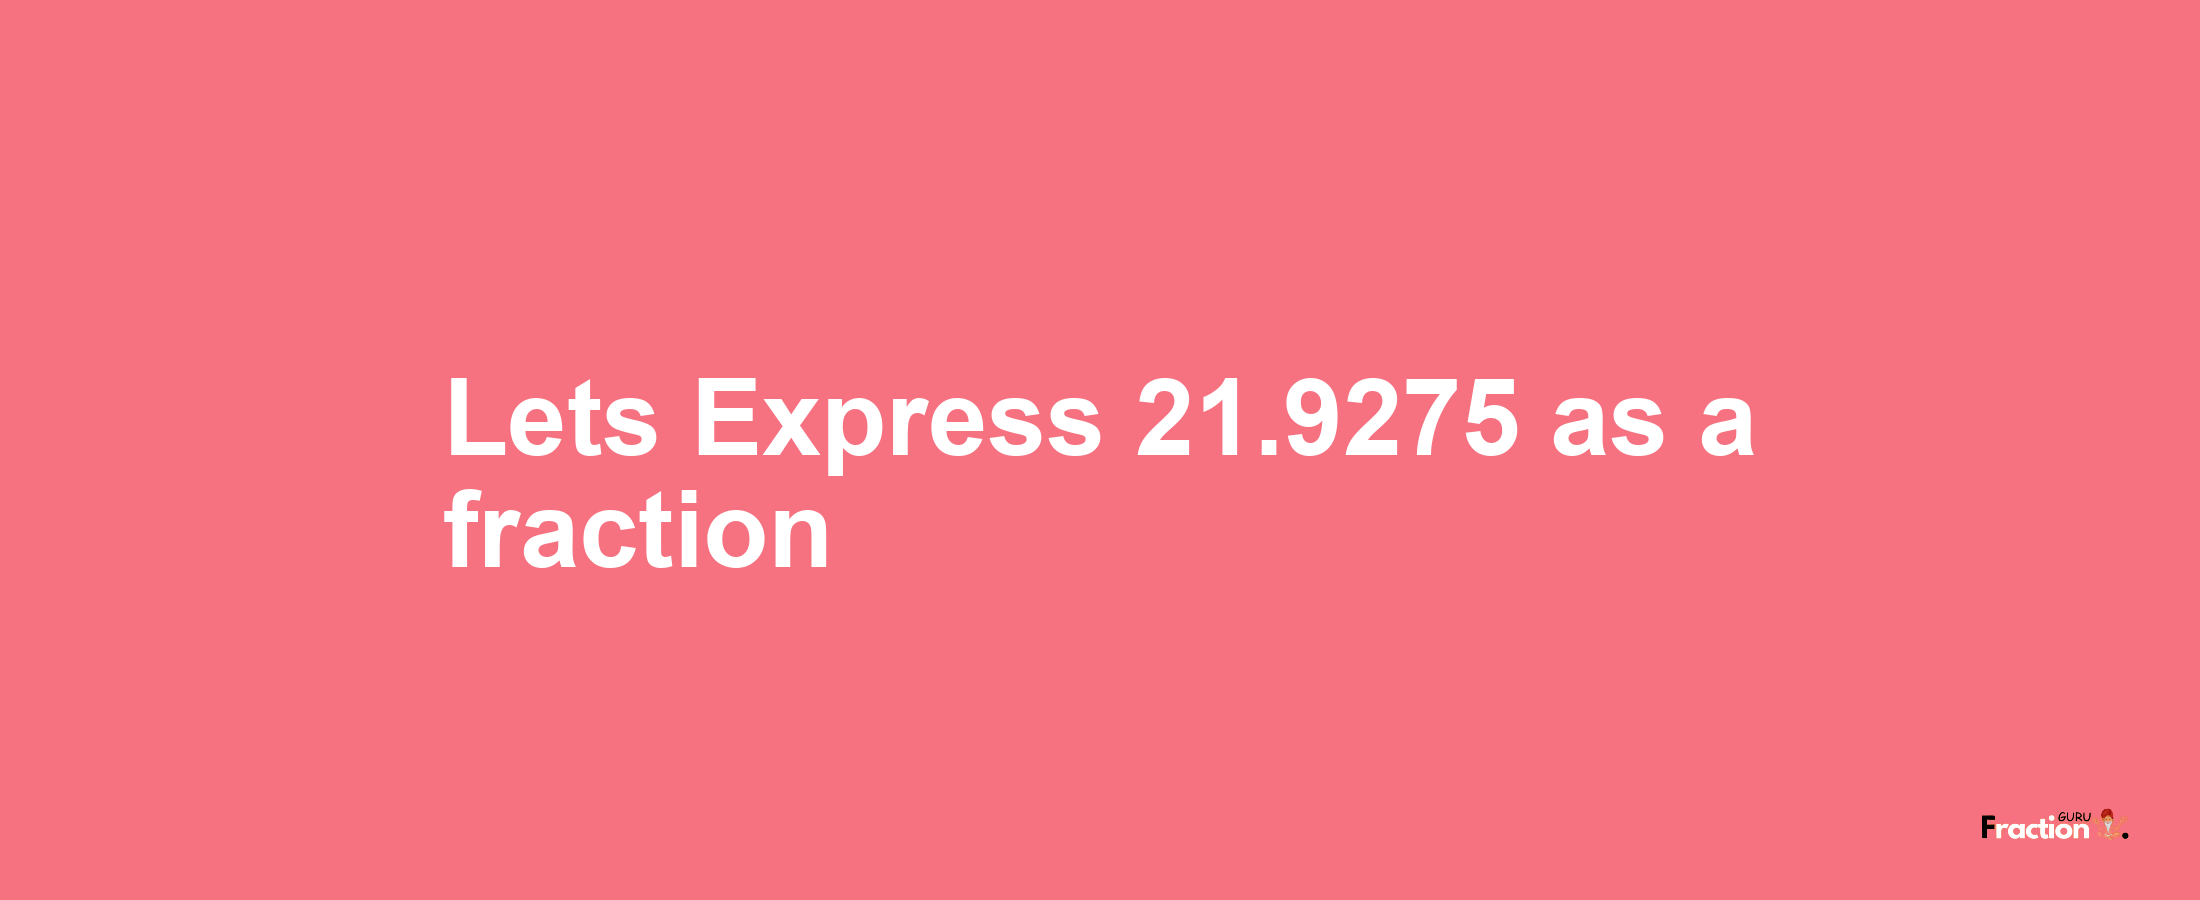 Lets Express 21.9275 as afraction